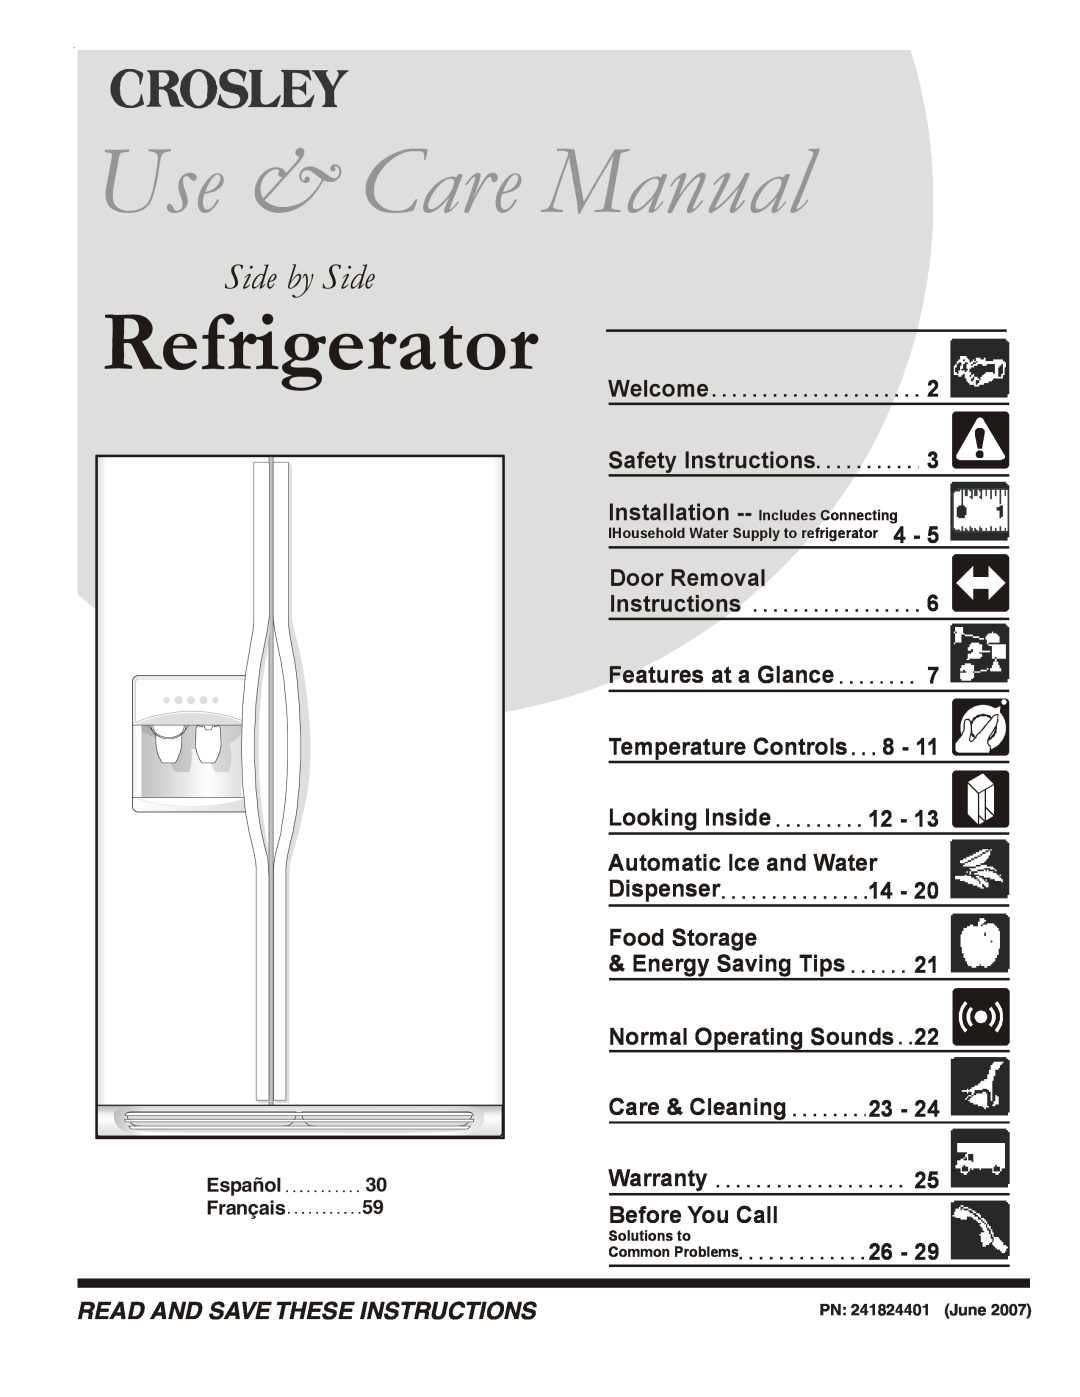 Crosley 241024401 manual Use & Care Manual, Refrigerator, Side by Side, Read And Save These Instructions 